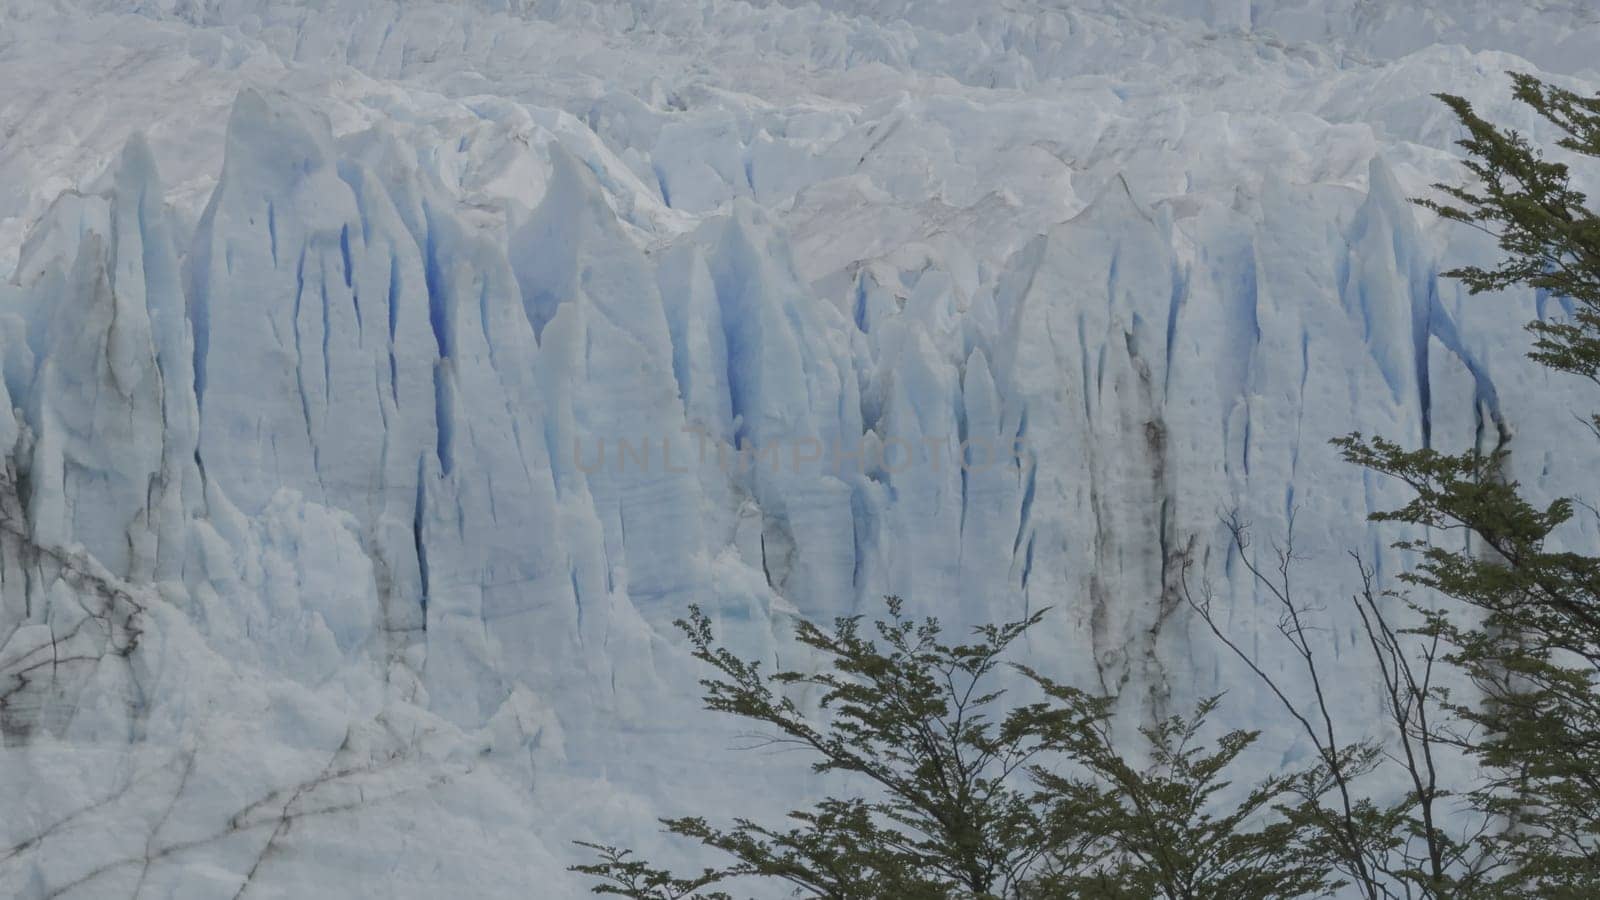 A calm tree stands before an expansive glacier with deep fissures.